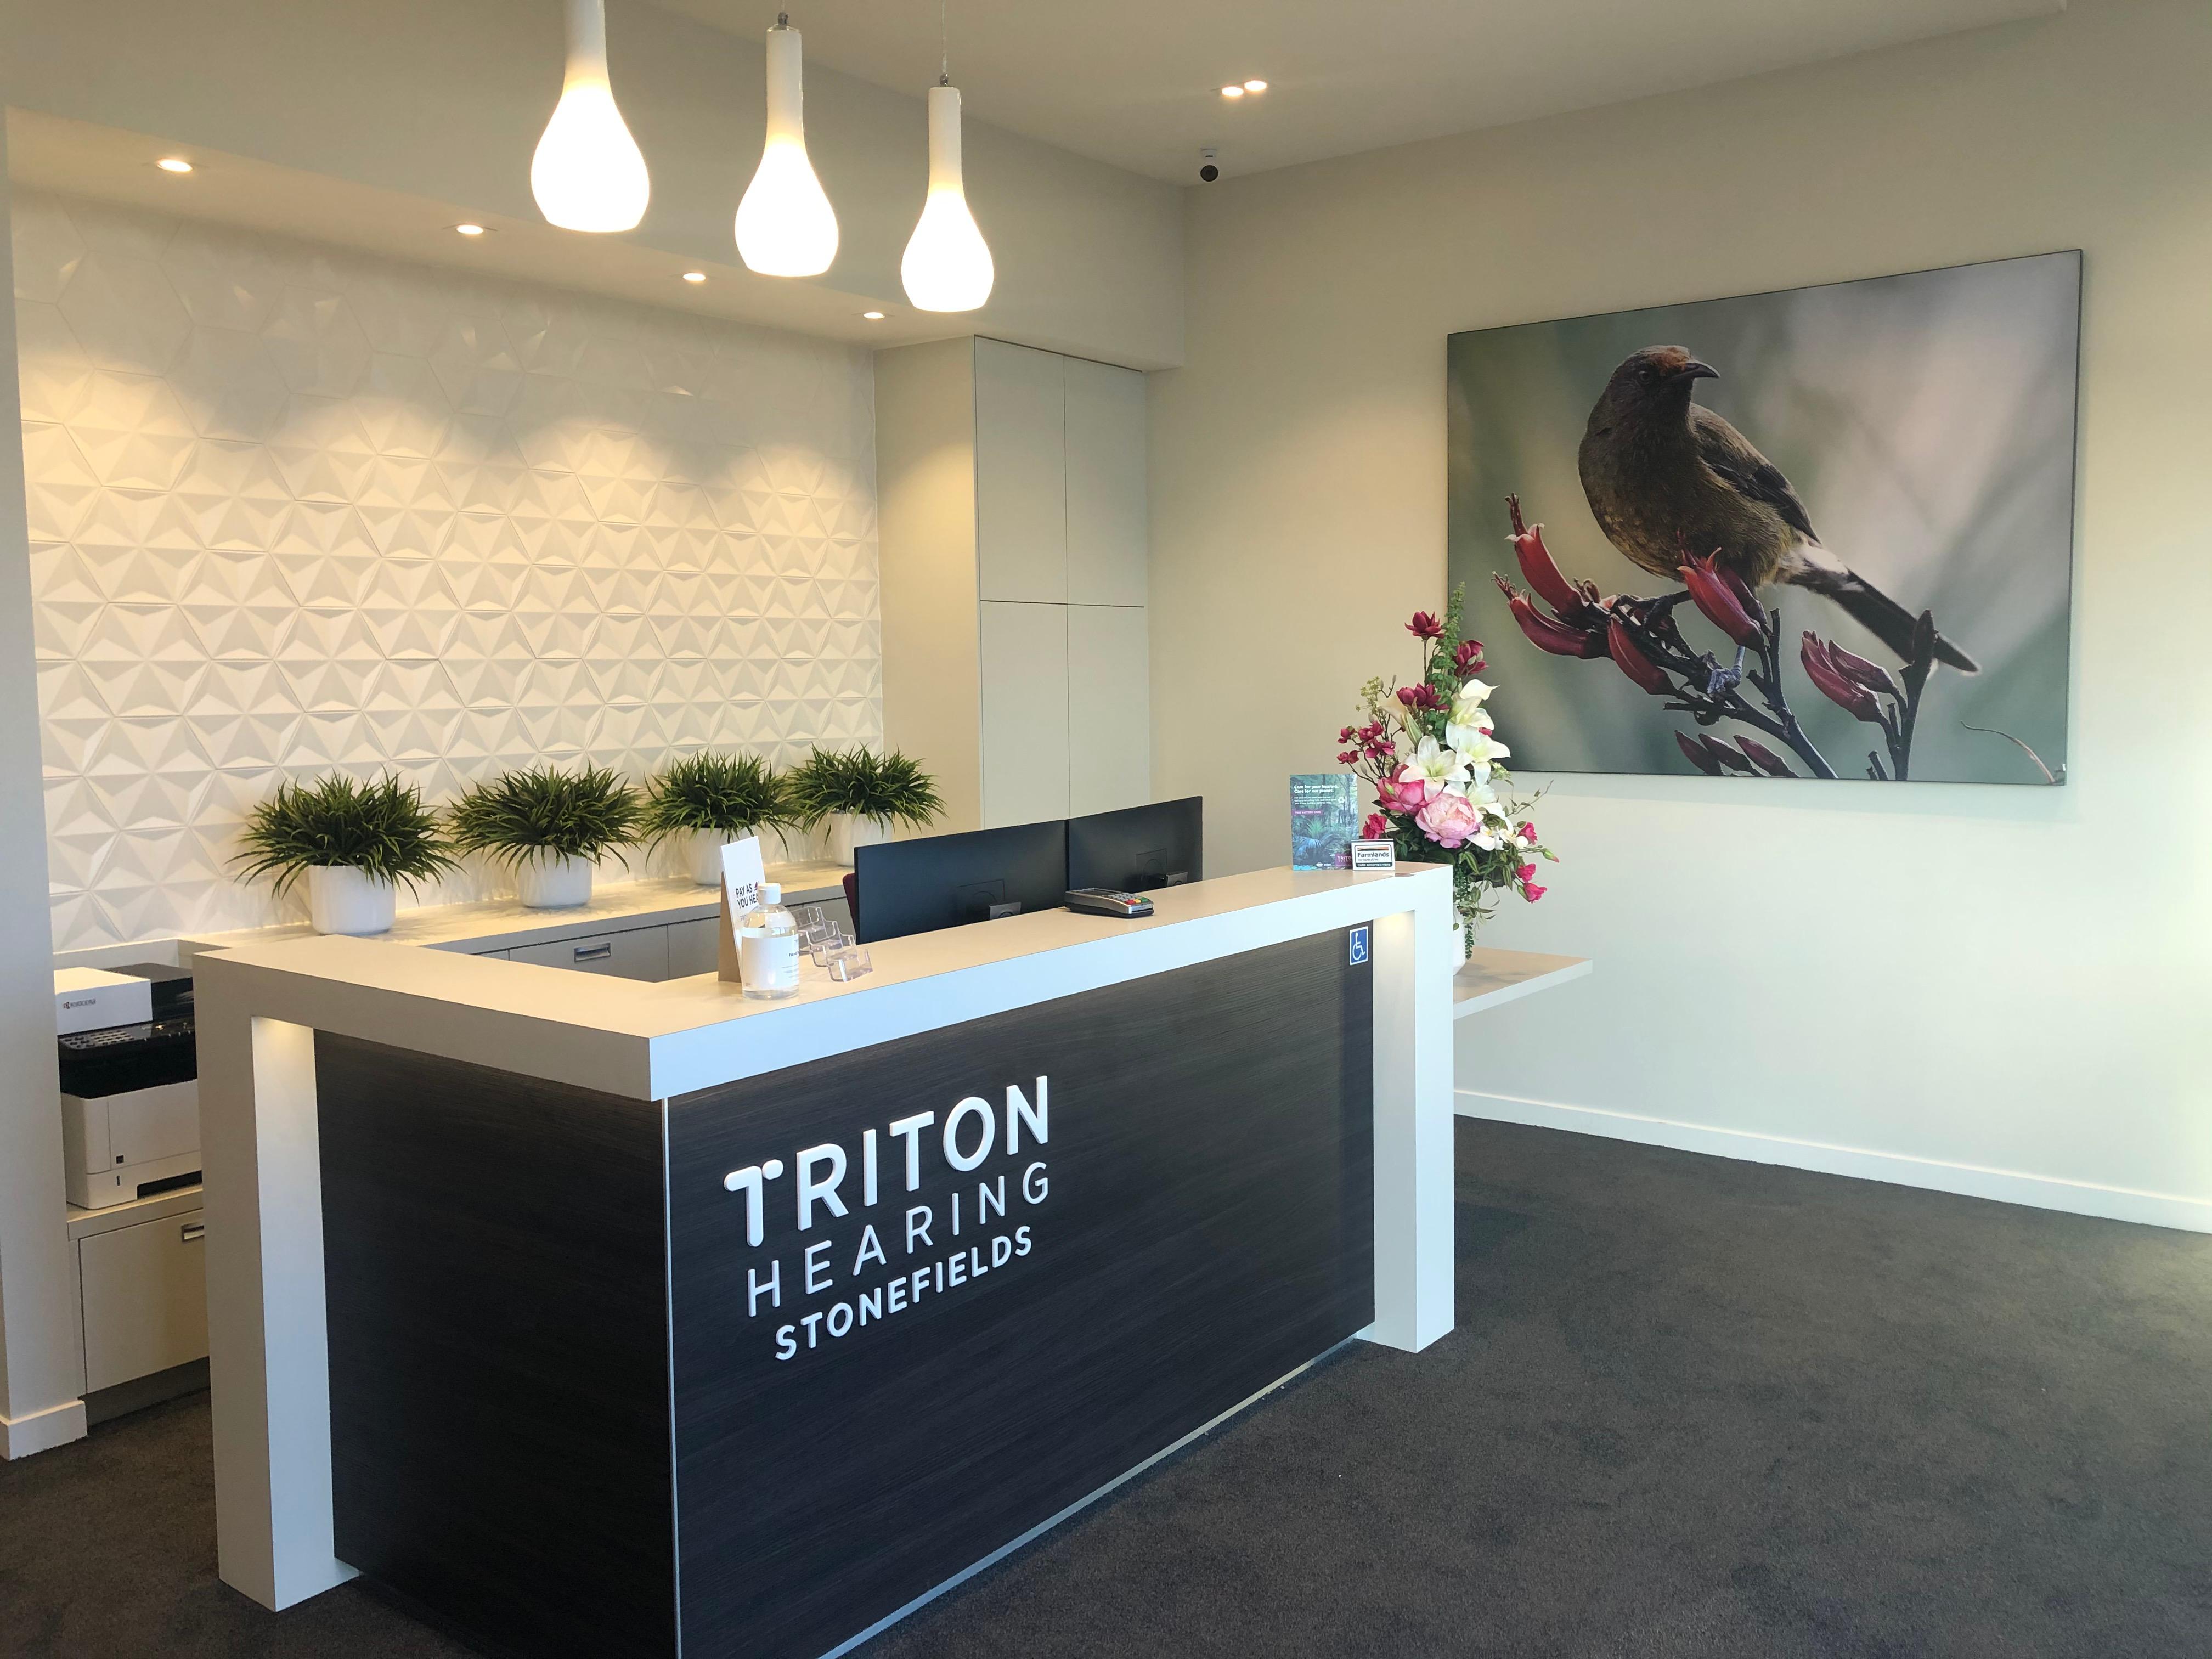 Images Triton Hearing, Stonefields, Auckland